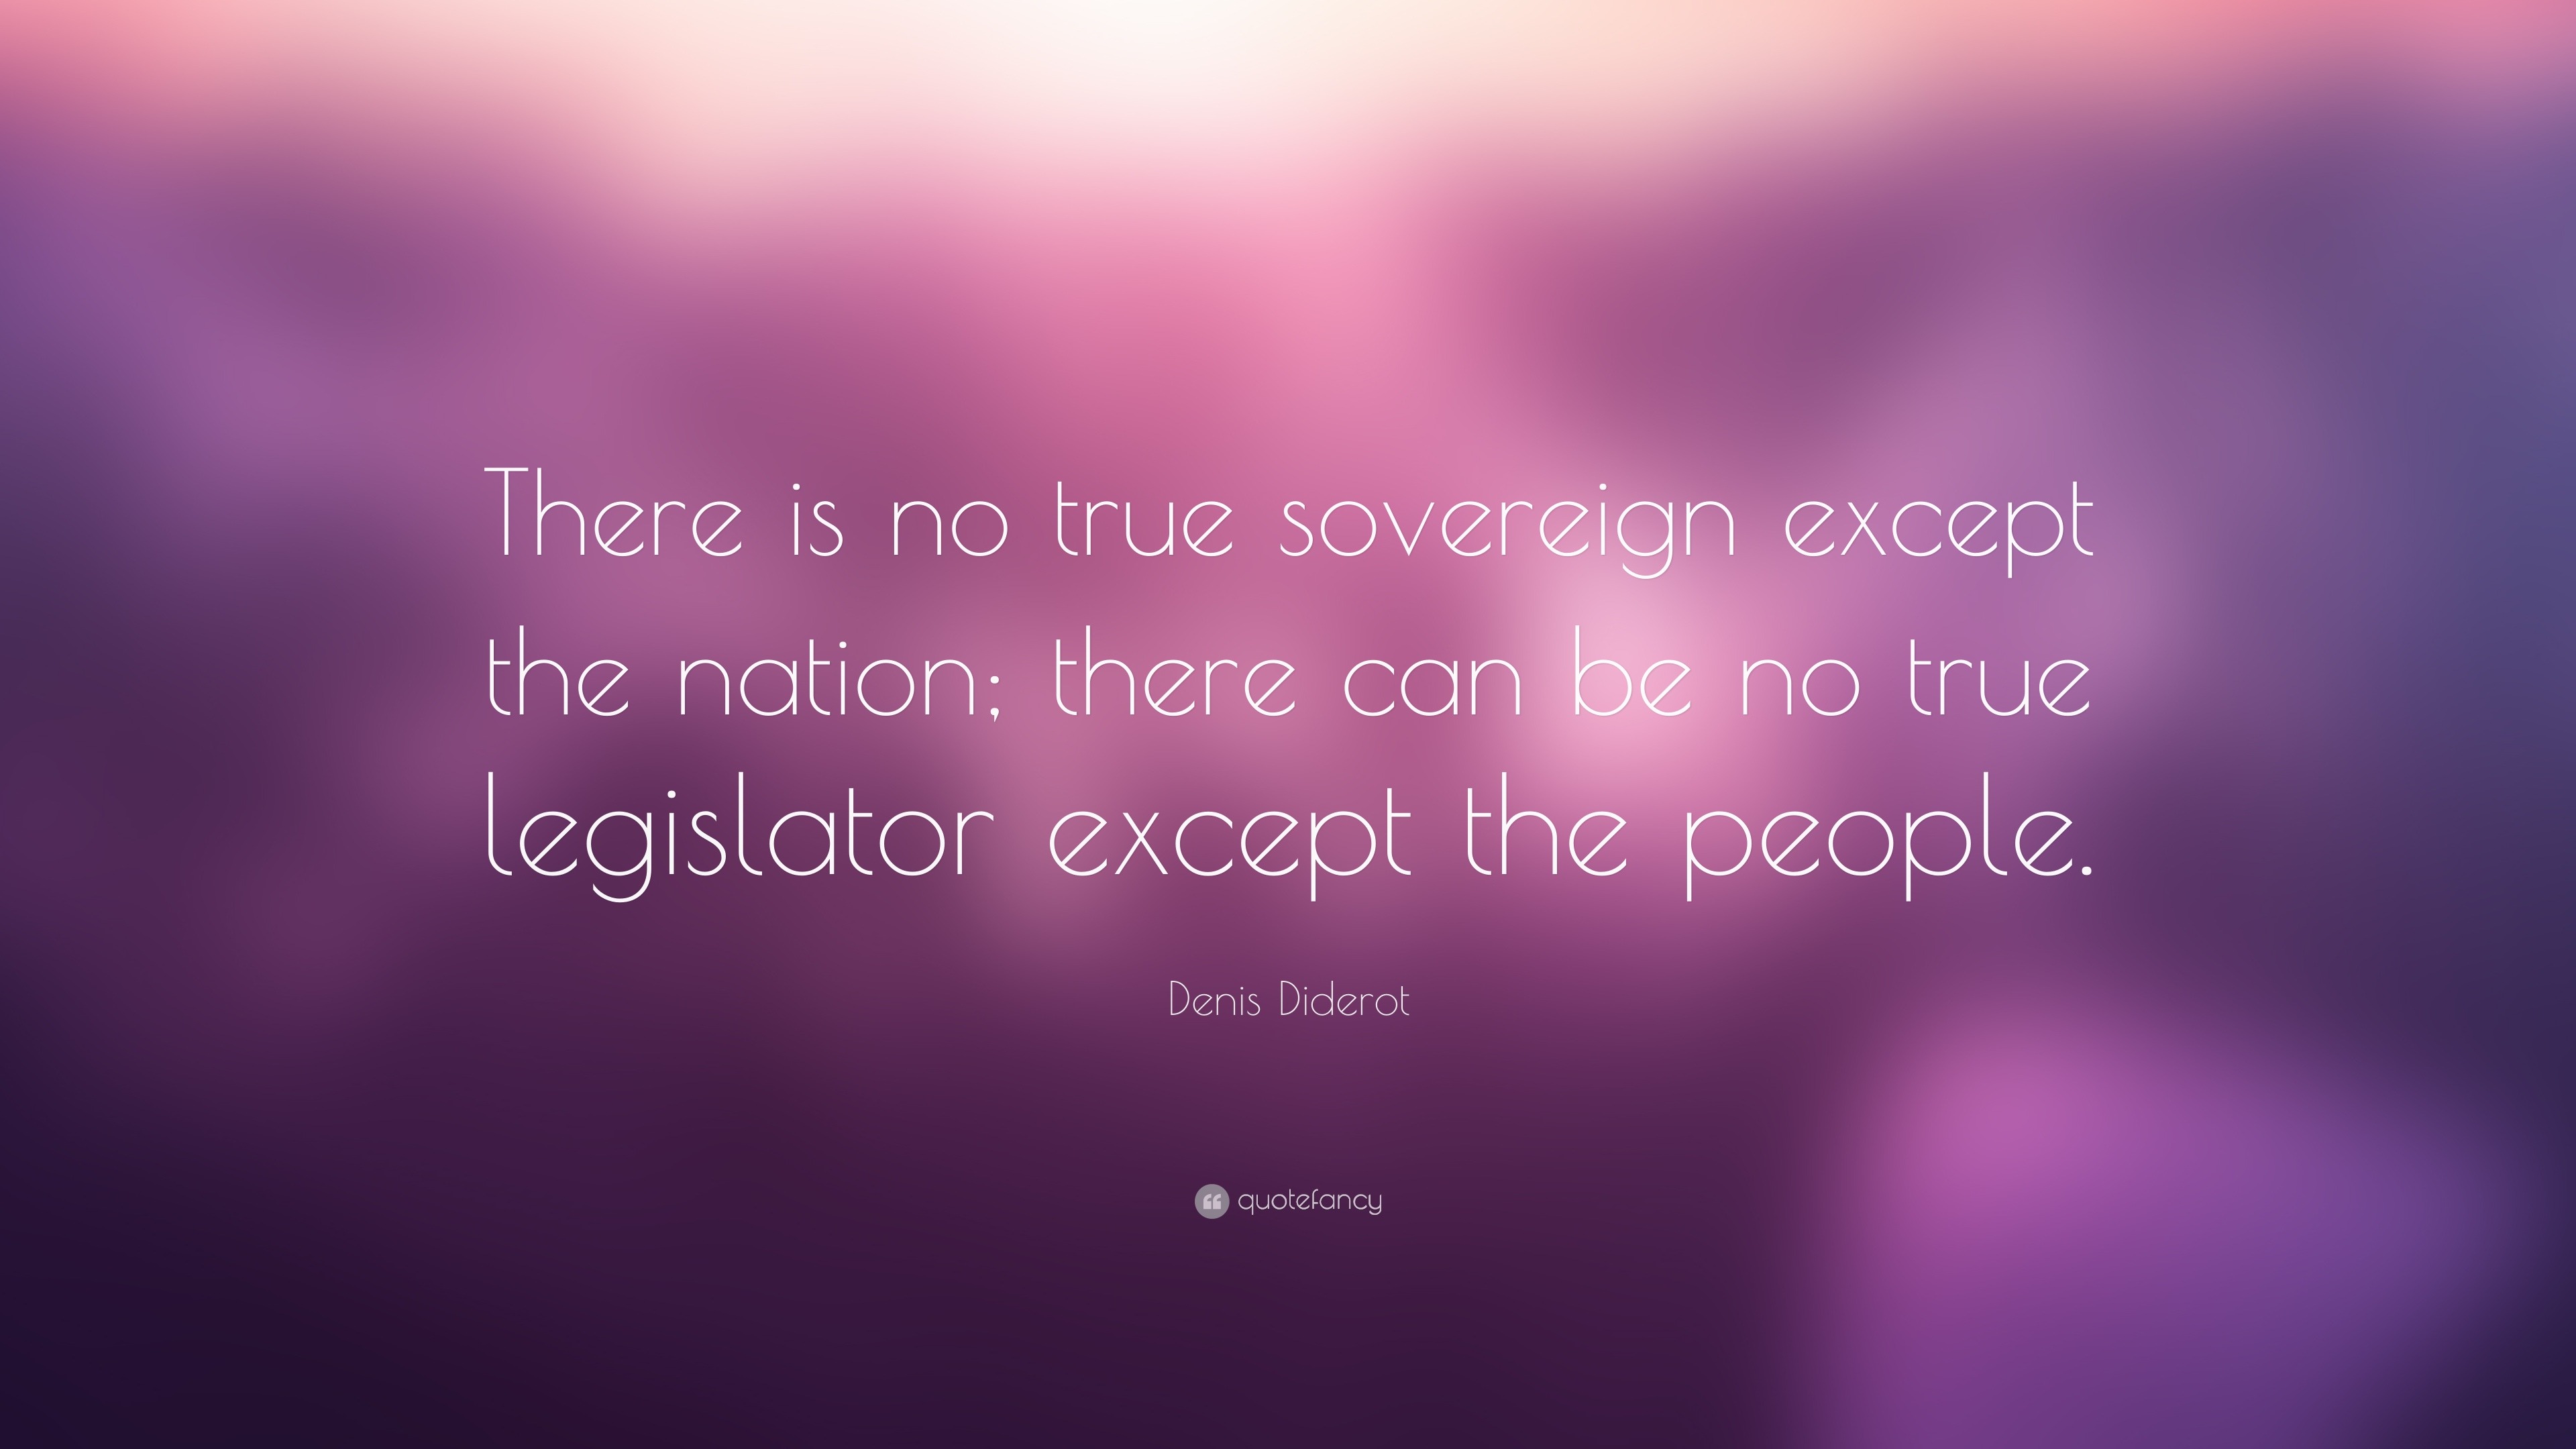 Denis Diderot Quote: "There is no true sovereign except ...